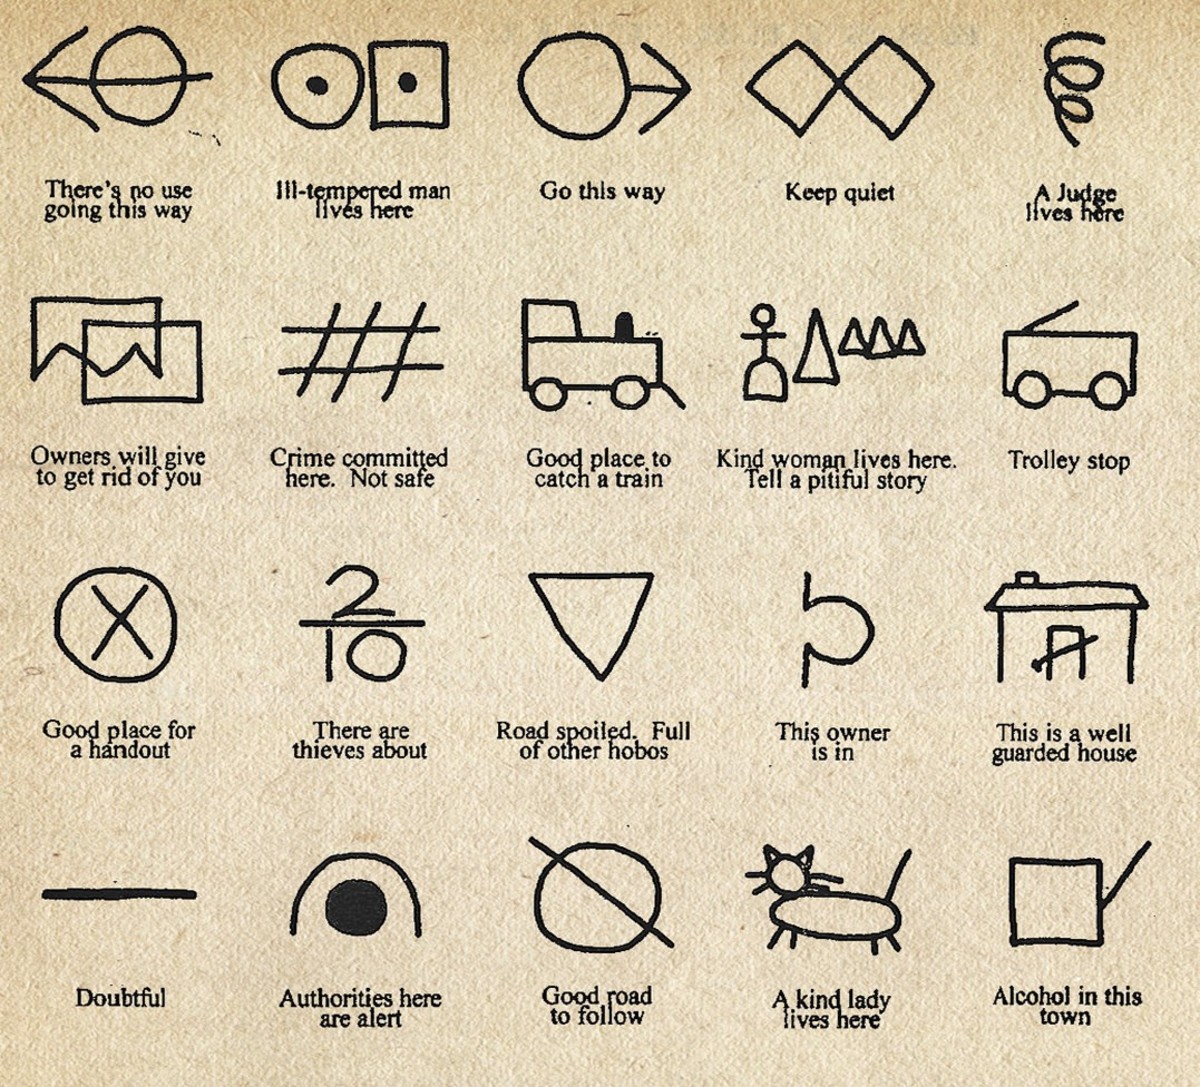 THE HOBO SIGNS